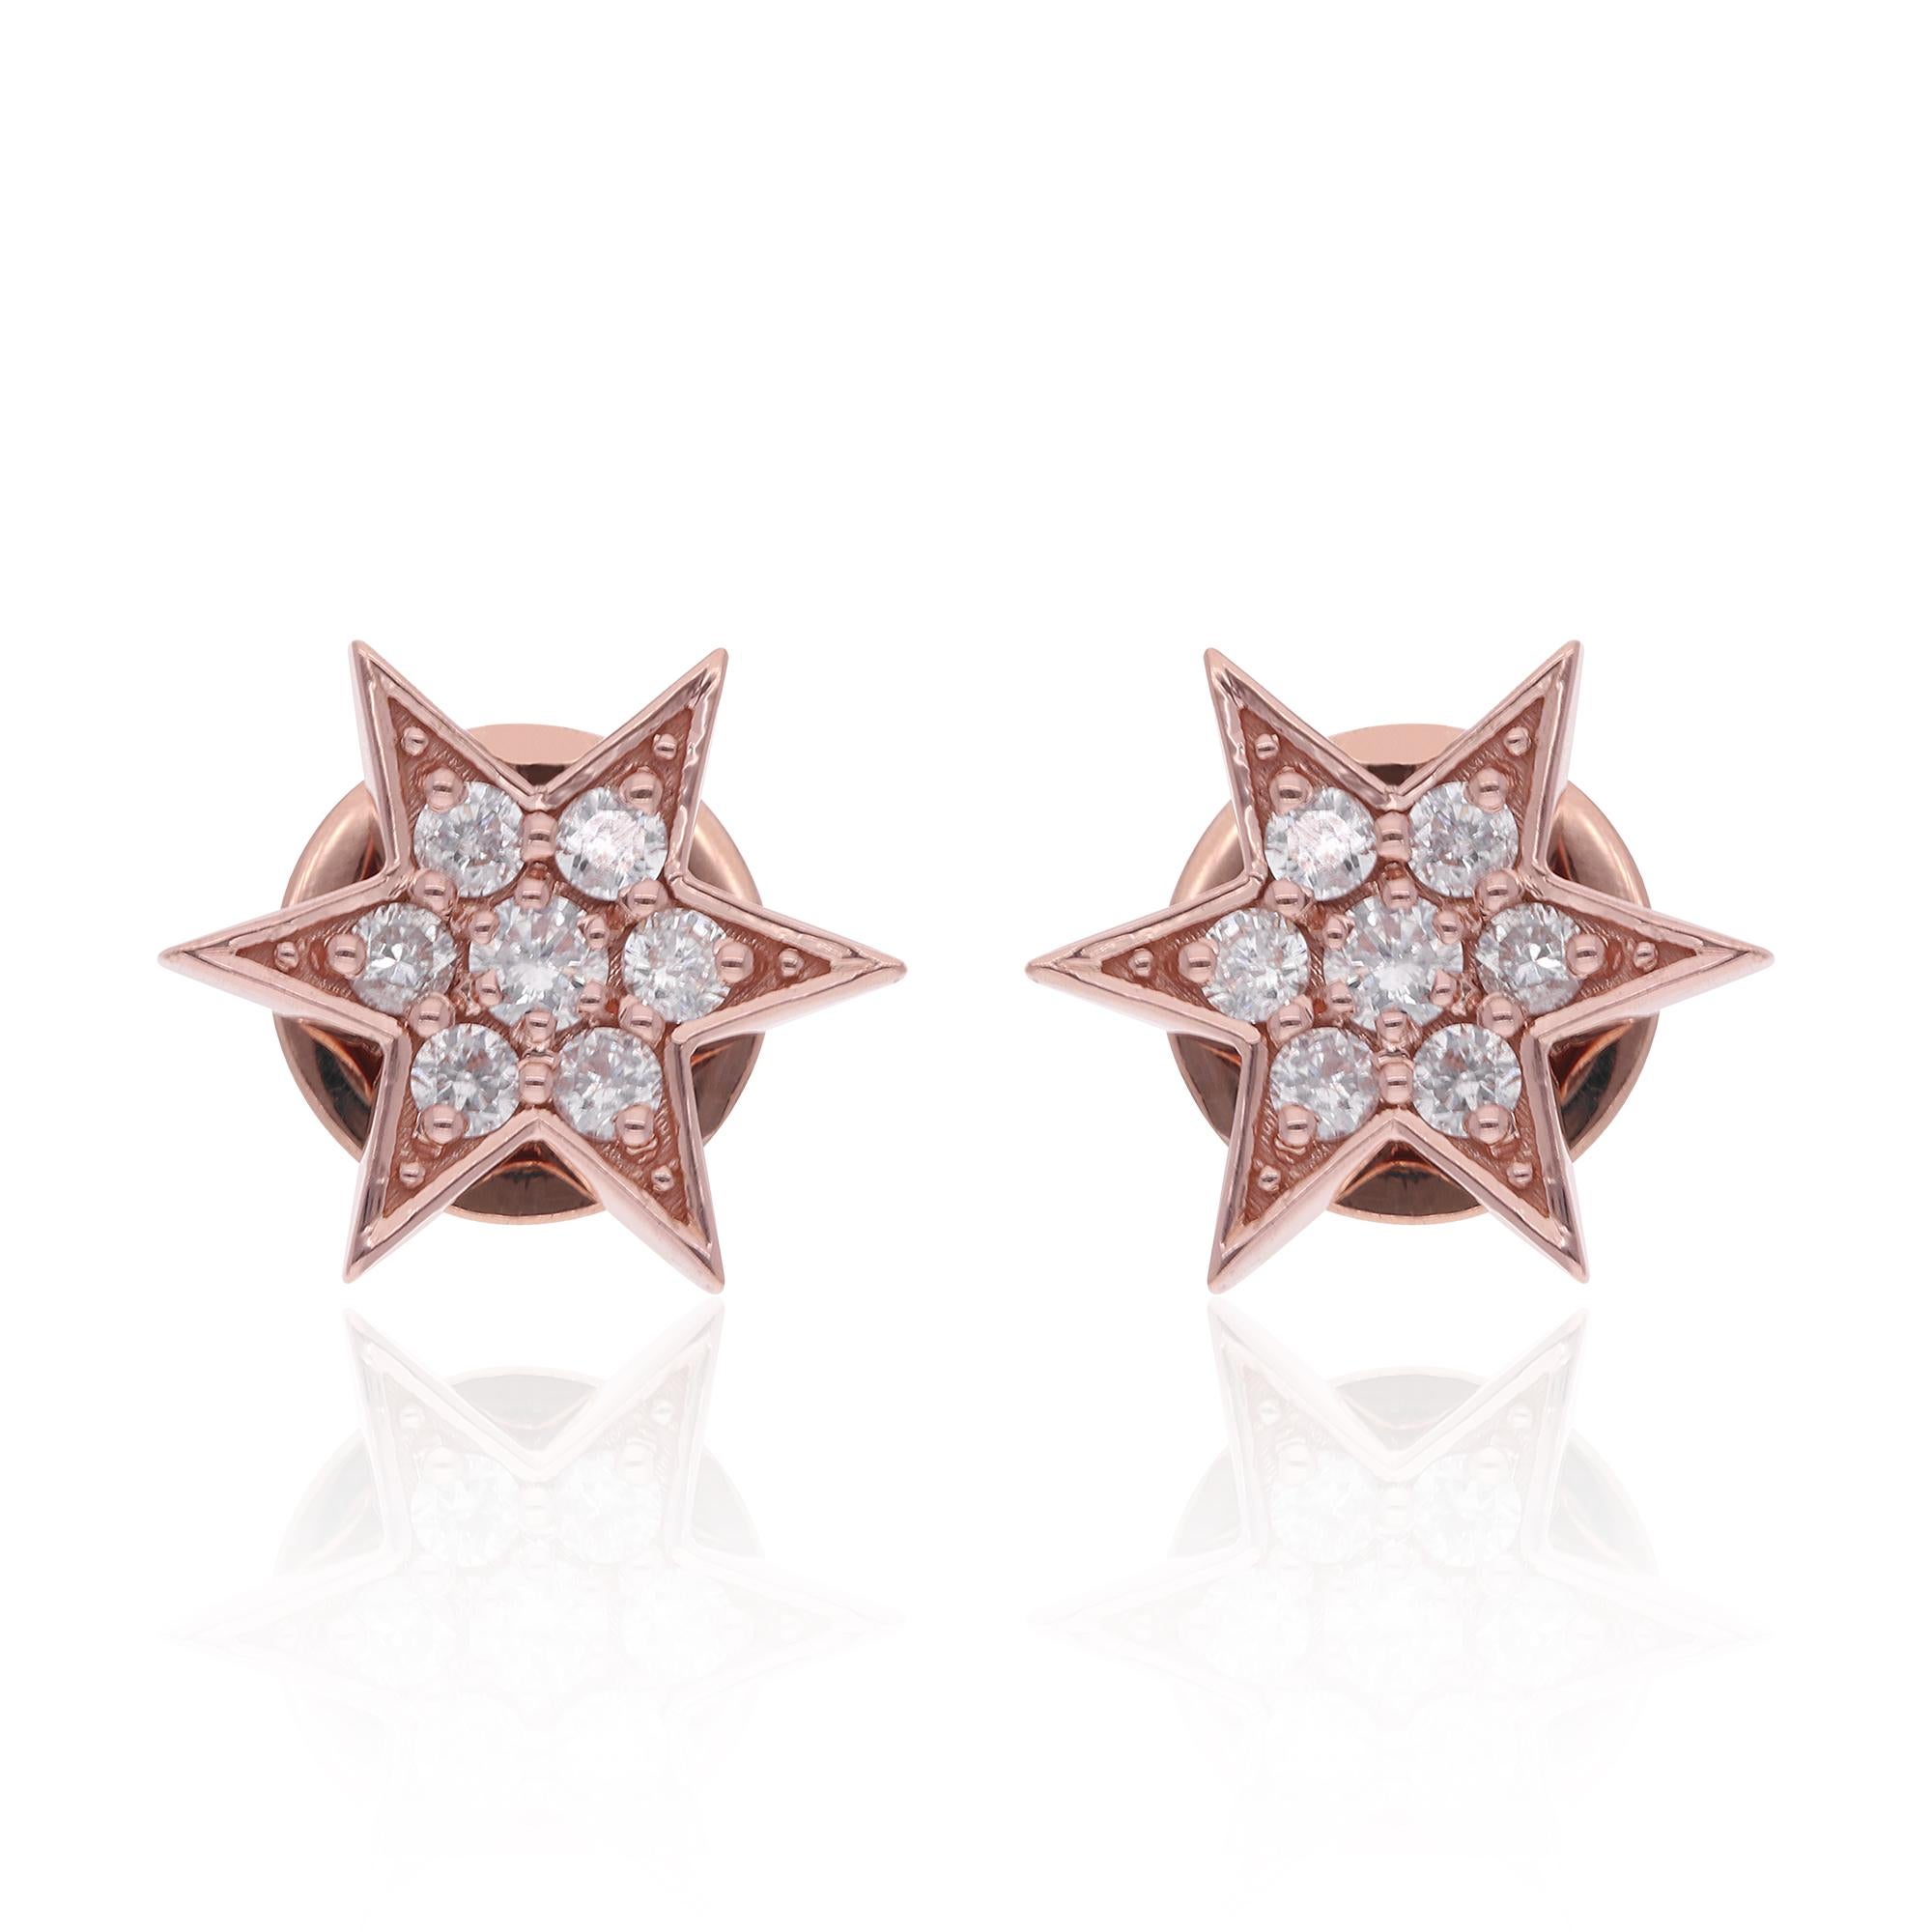 These exquisite stud earrings feature a starburst design that is both captivating and elegant. Each earring showcases a central diamond surrounded by smaller diamonds, forming a radiant starburst pattern.

Item Code :- SEE-14377 (14k)
Gross Wt. :-